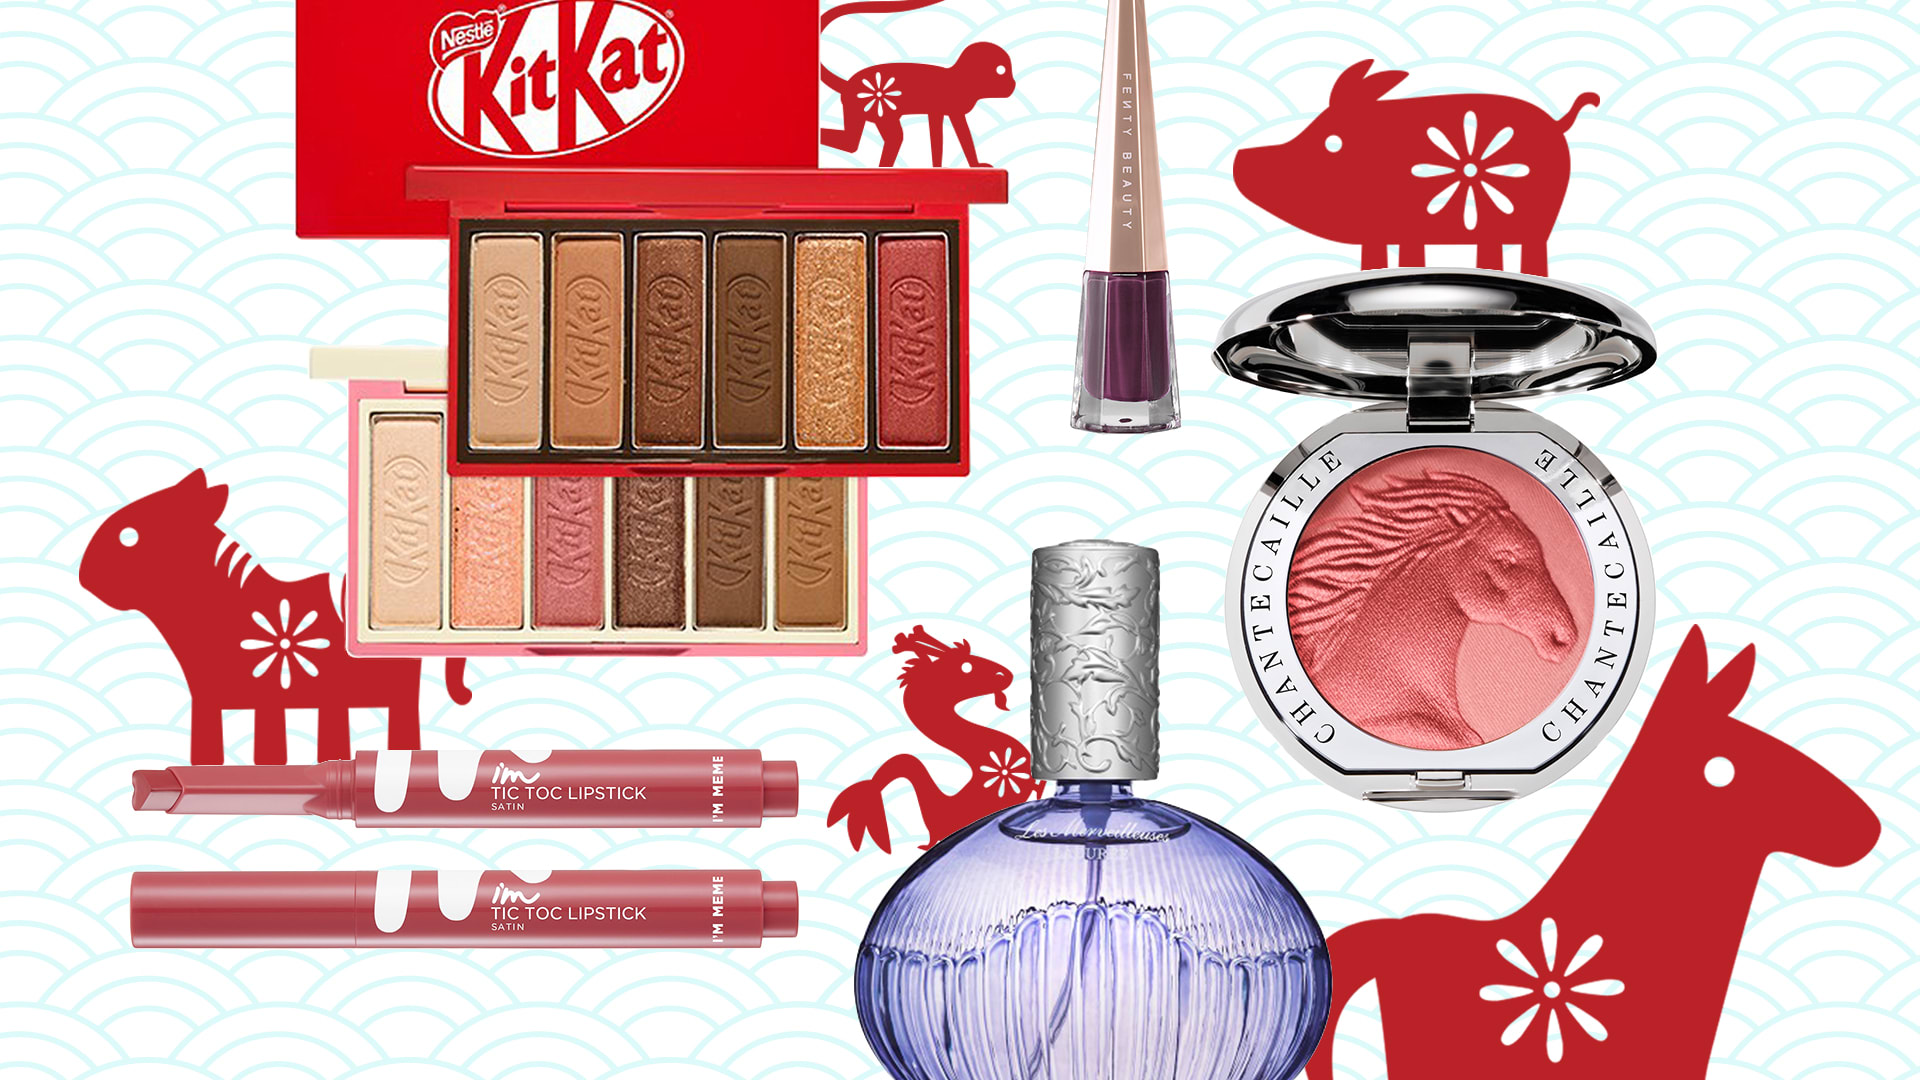 The 12 Huat Beauty Products You Need This Year, Based On Your Year Of The Pig Zodiac Forecast